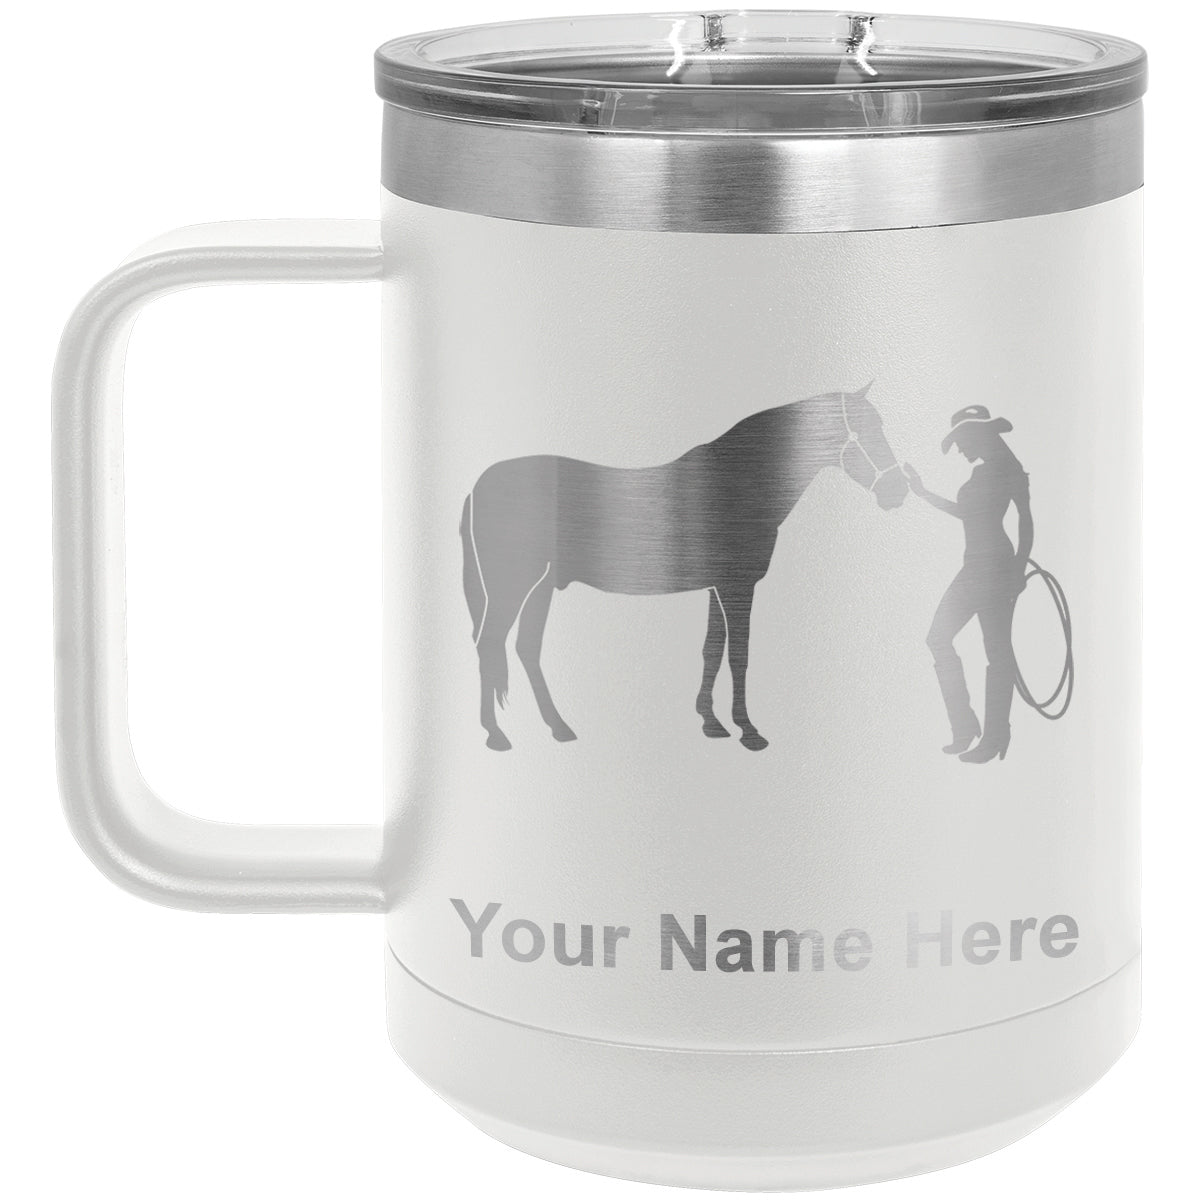 15oz Vacuum Insulated Coffee Mug, Horse and Cowgirl, Personalized Engraving Included